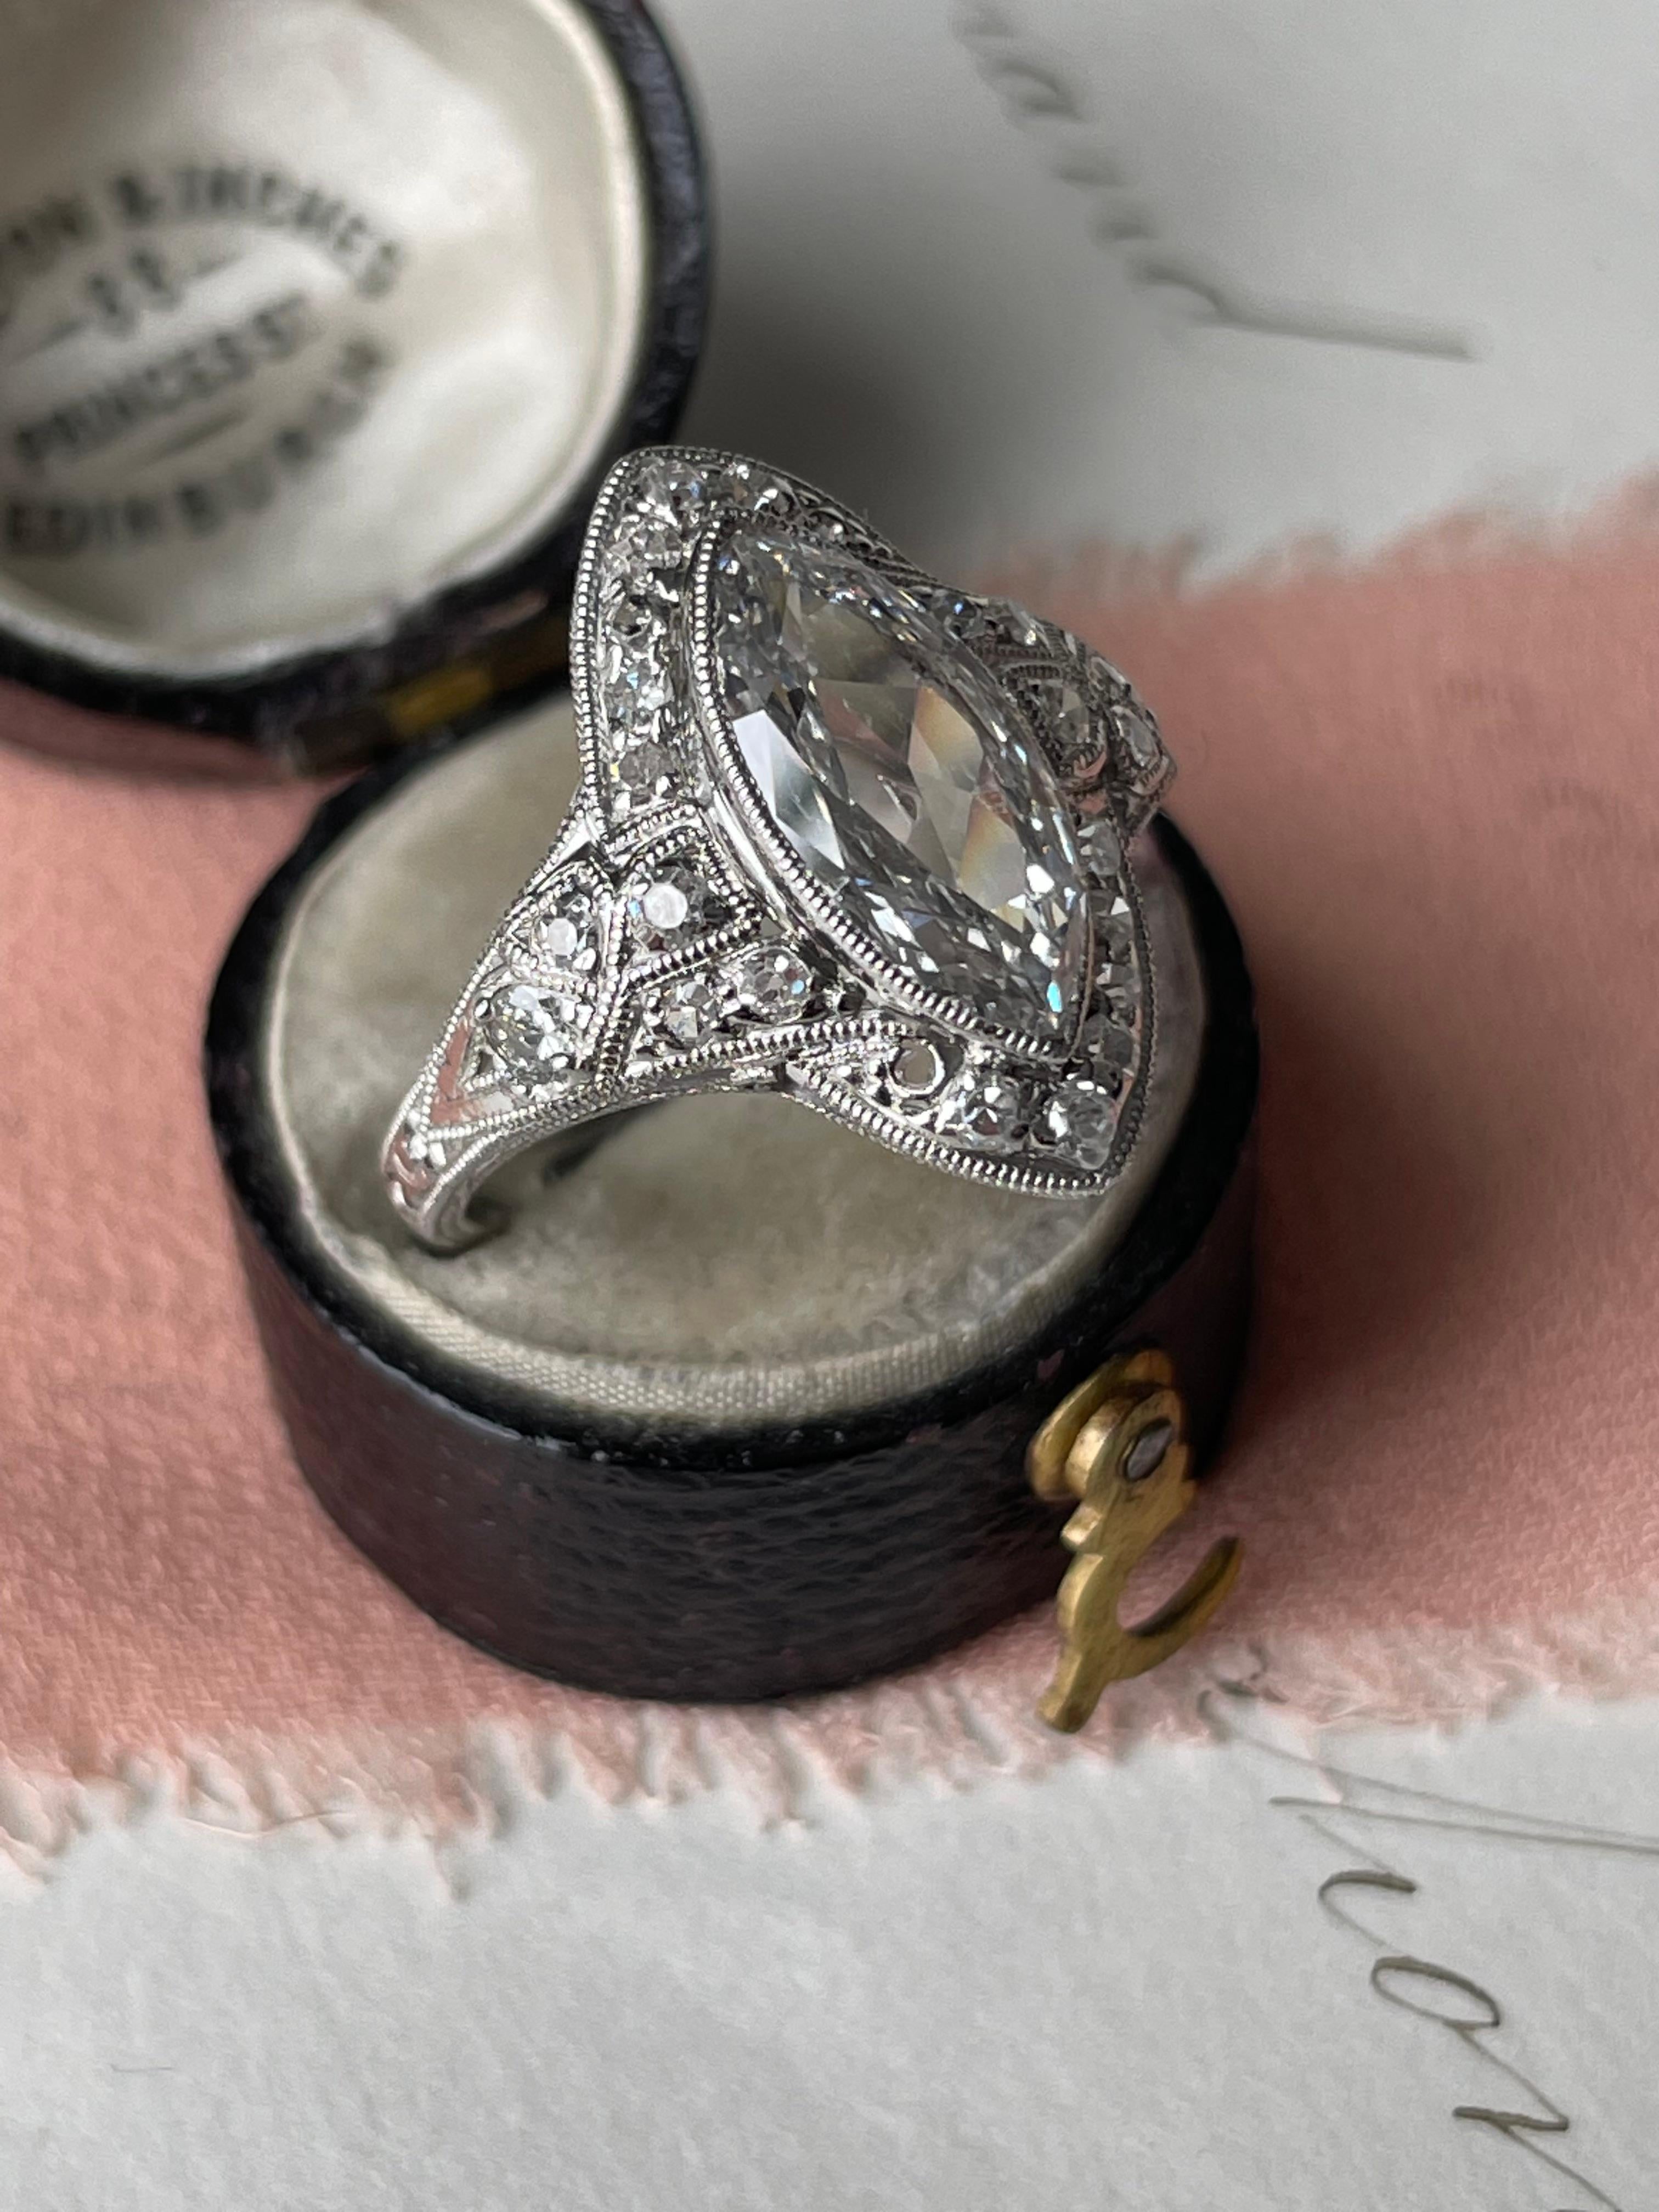 This sweet late Edwardian/early Art Deco ring centers on a sparkling 1.17 carat marquise diamond framed in twinkling single-cut diamonds artfully embellished with delicate piercing and hand-engraved details, finished with crisp millegrain edges.